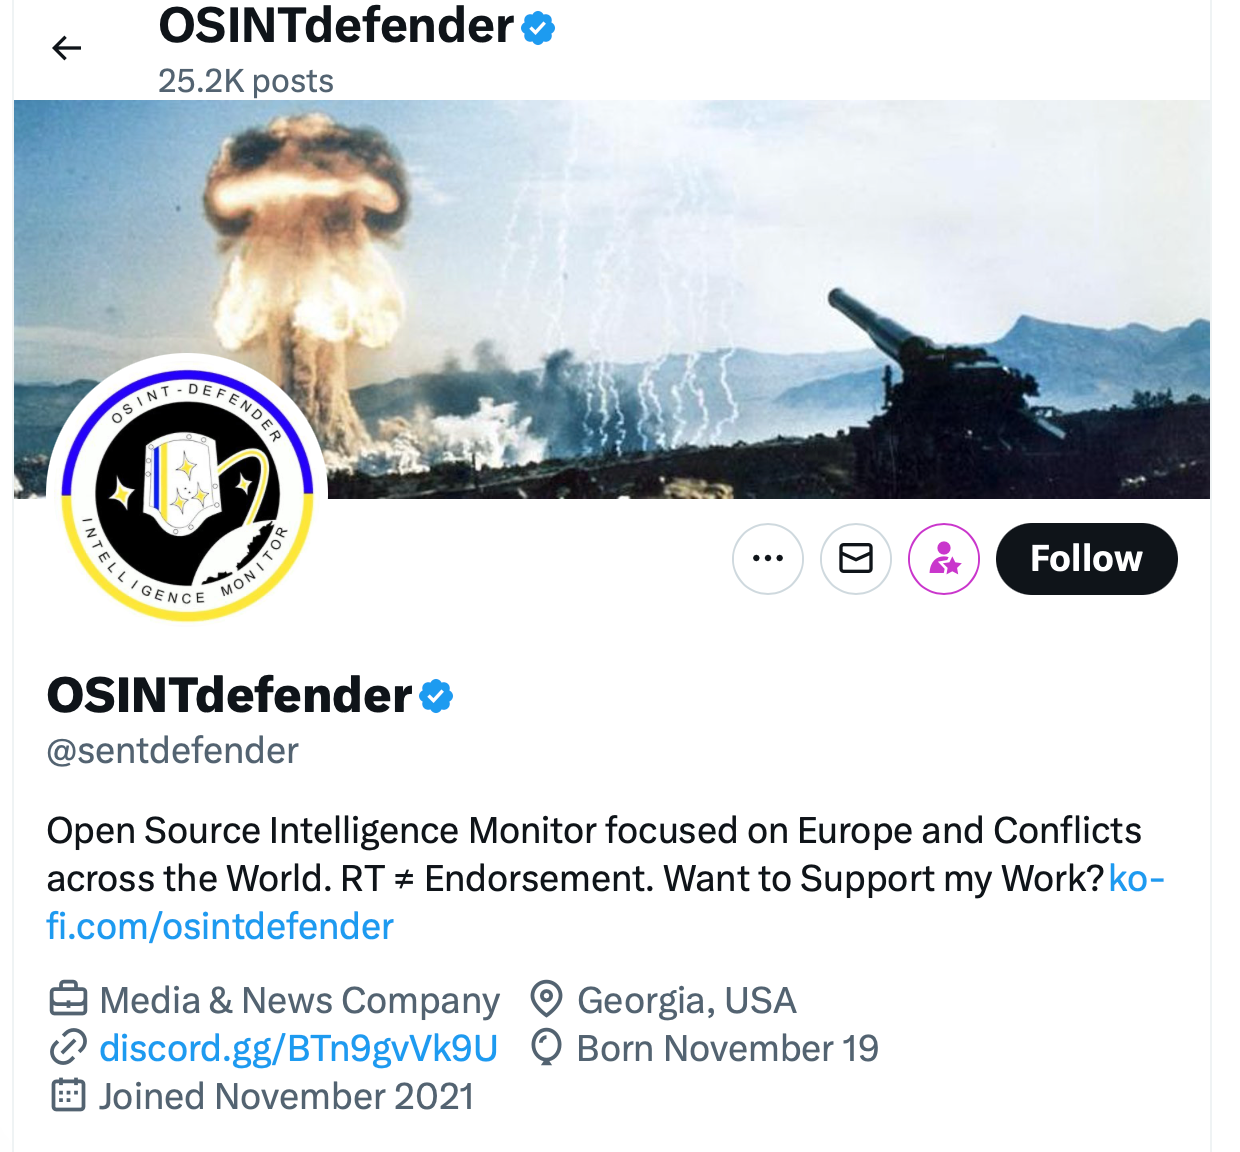 The influential @sentdefender gained hundreds of thousands of followers after it was boosted by Elon Musk